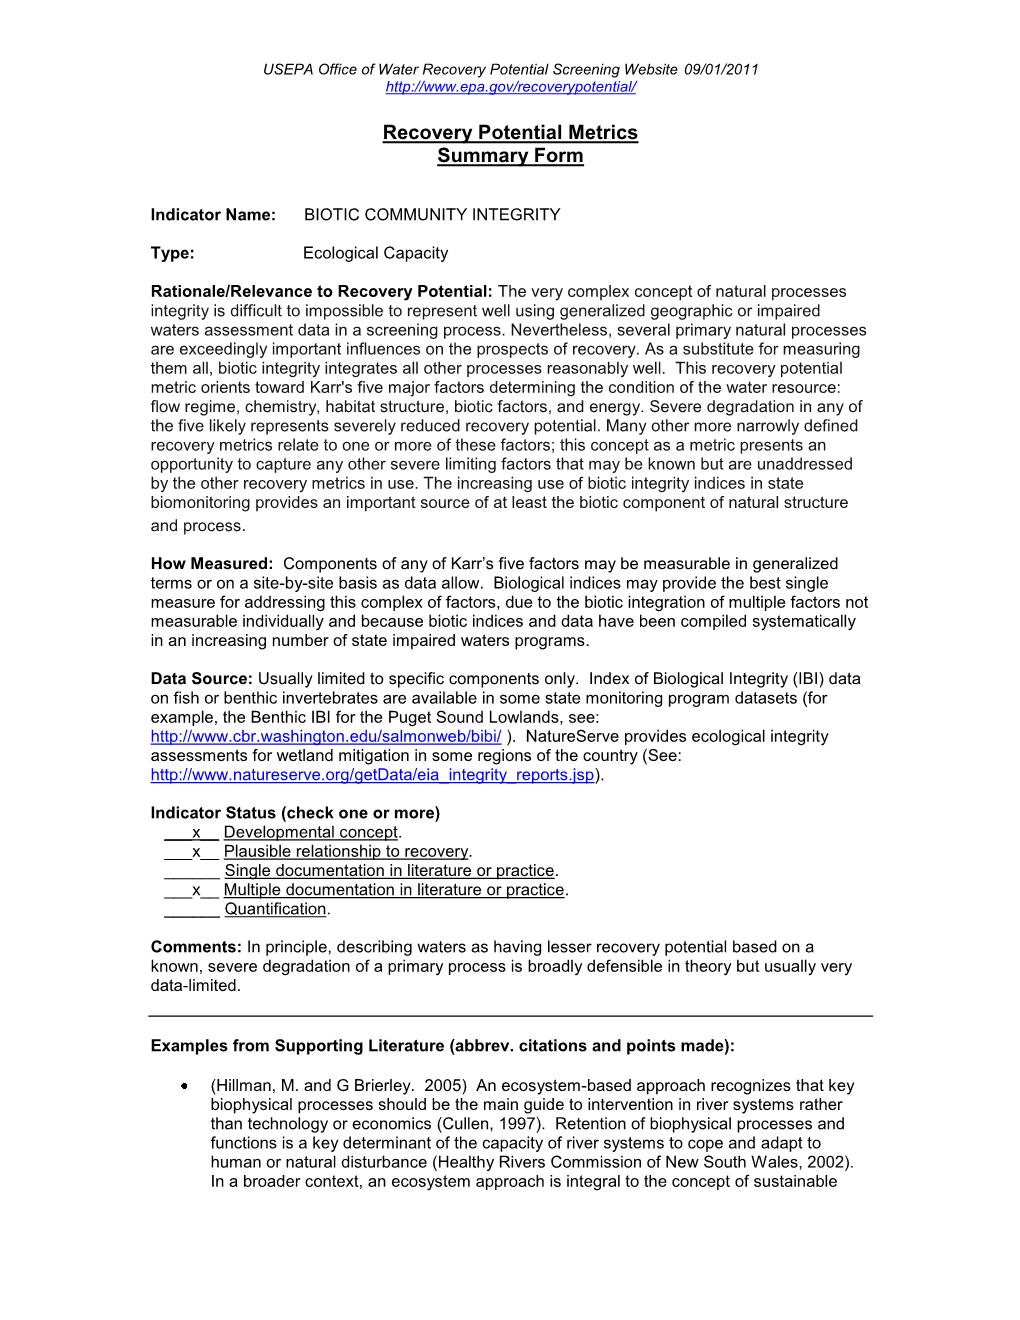 Watershed Recovery Potential Indicator Reference Sheet for Biotic Community Integrity